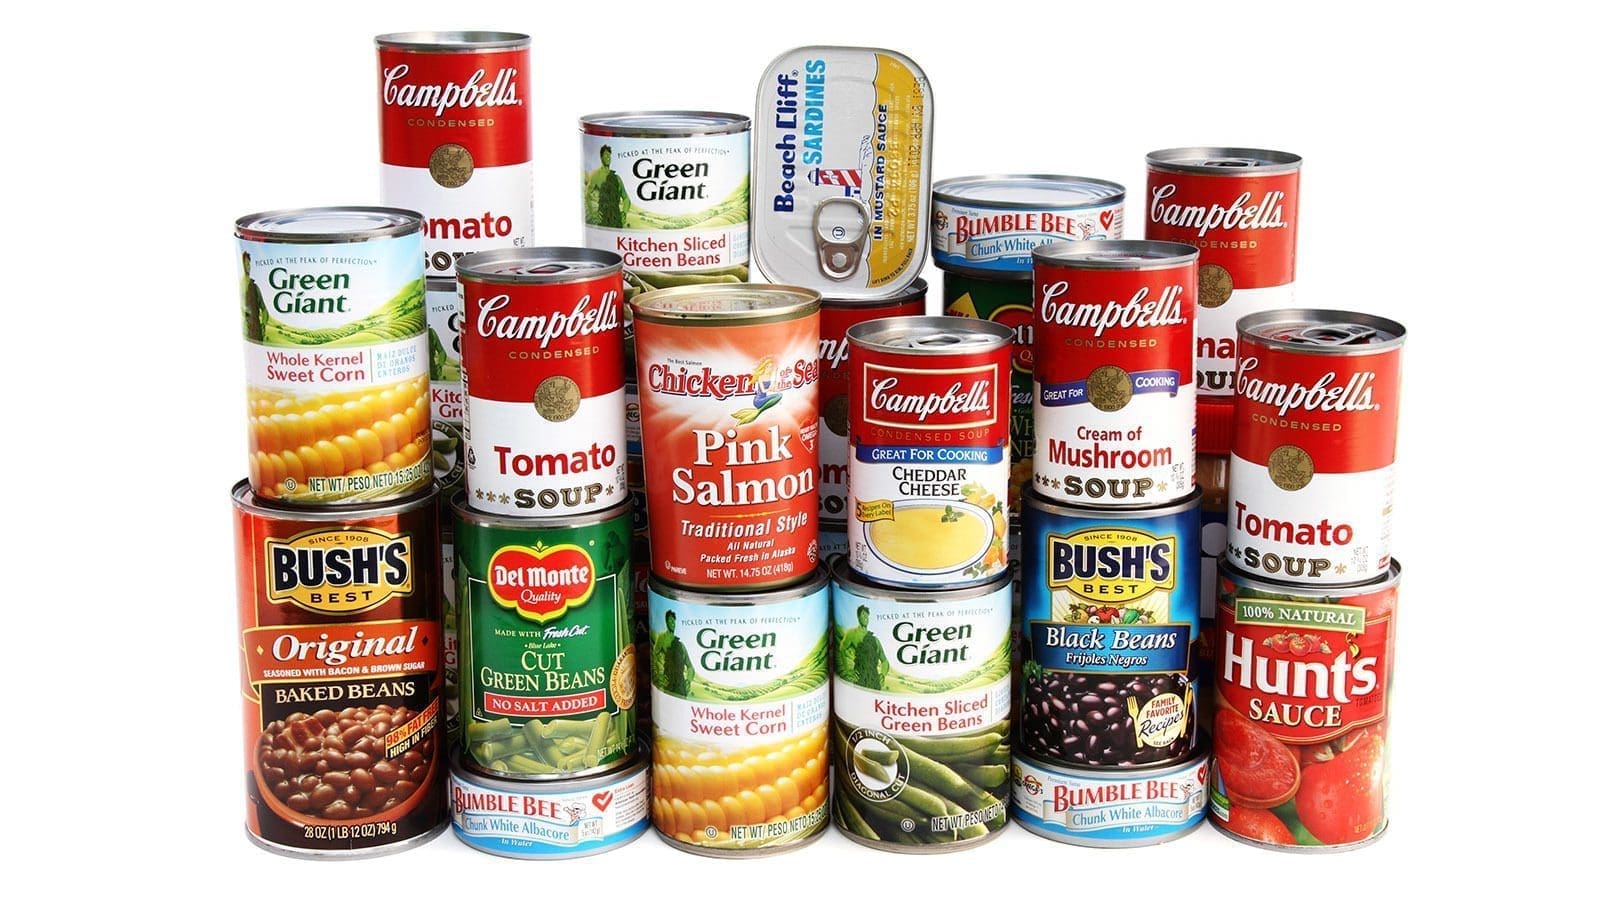 USDA releases update to its HACCP Model for canned products